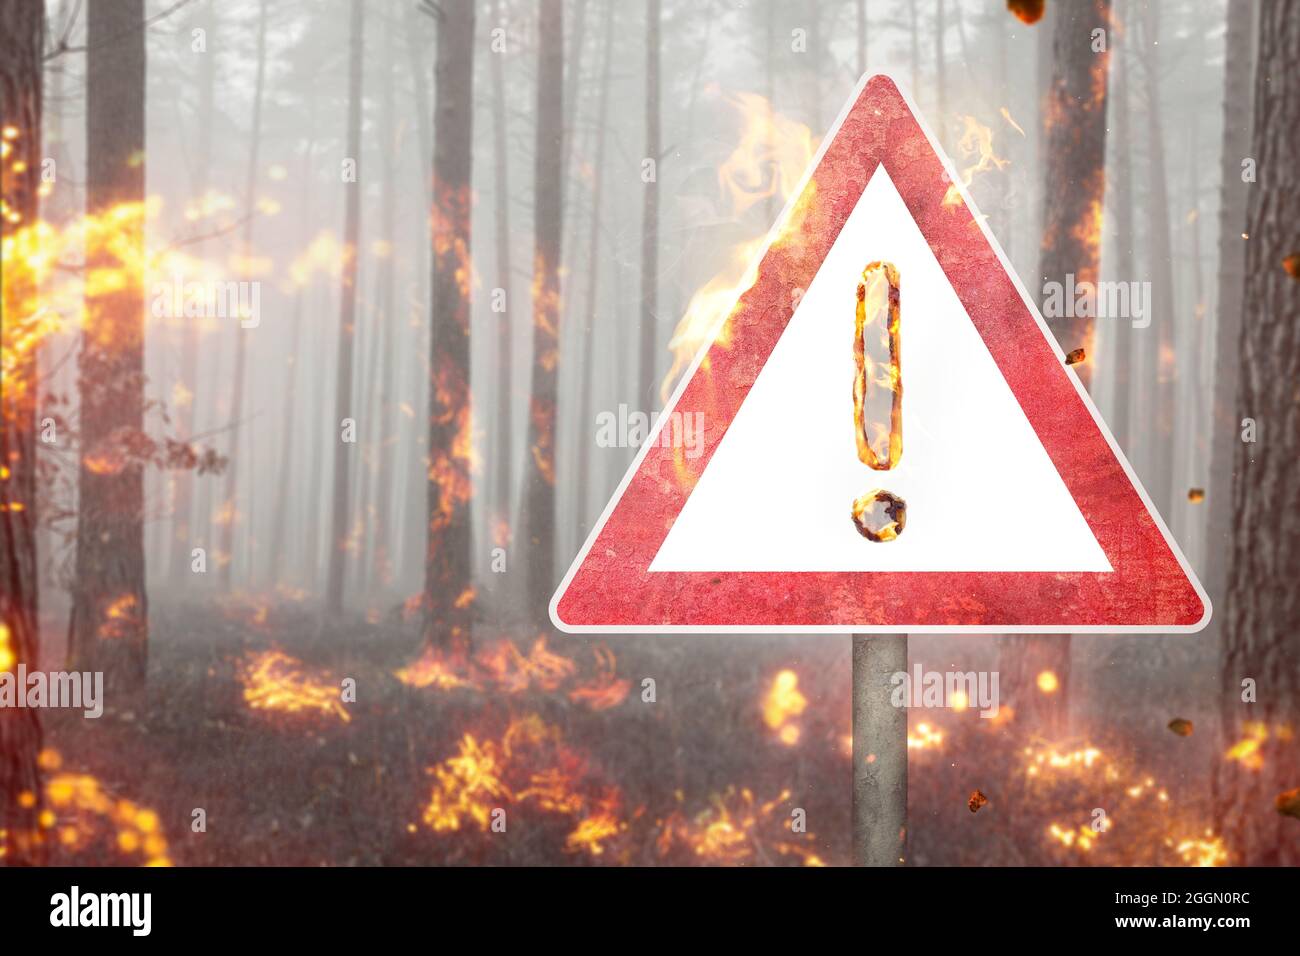 Warning sign in a burning forest Stock Photo